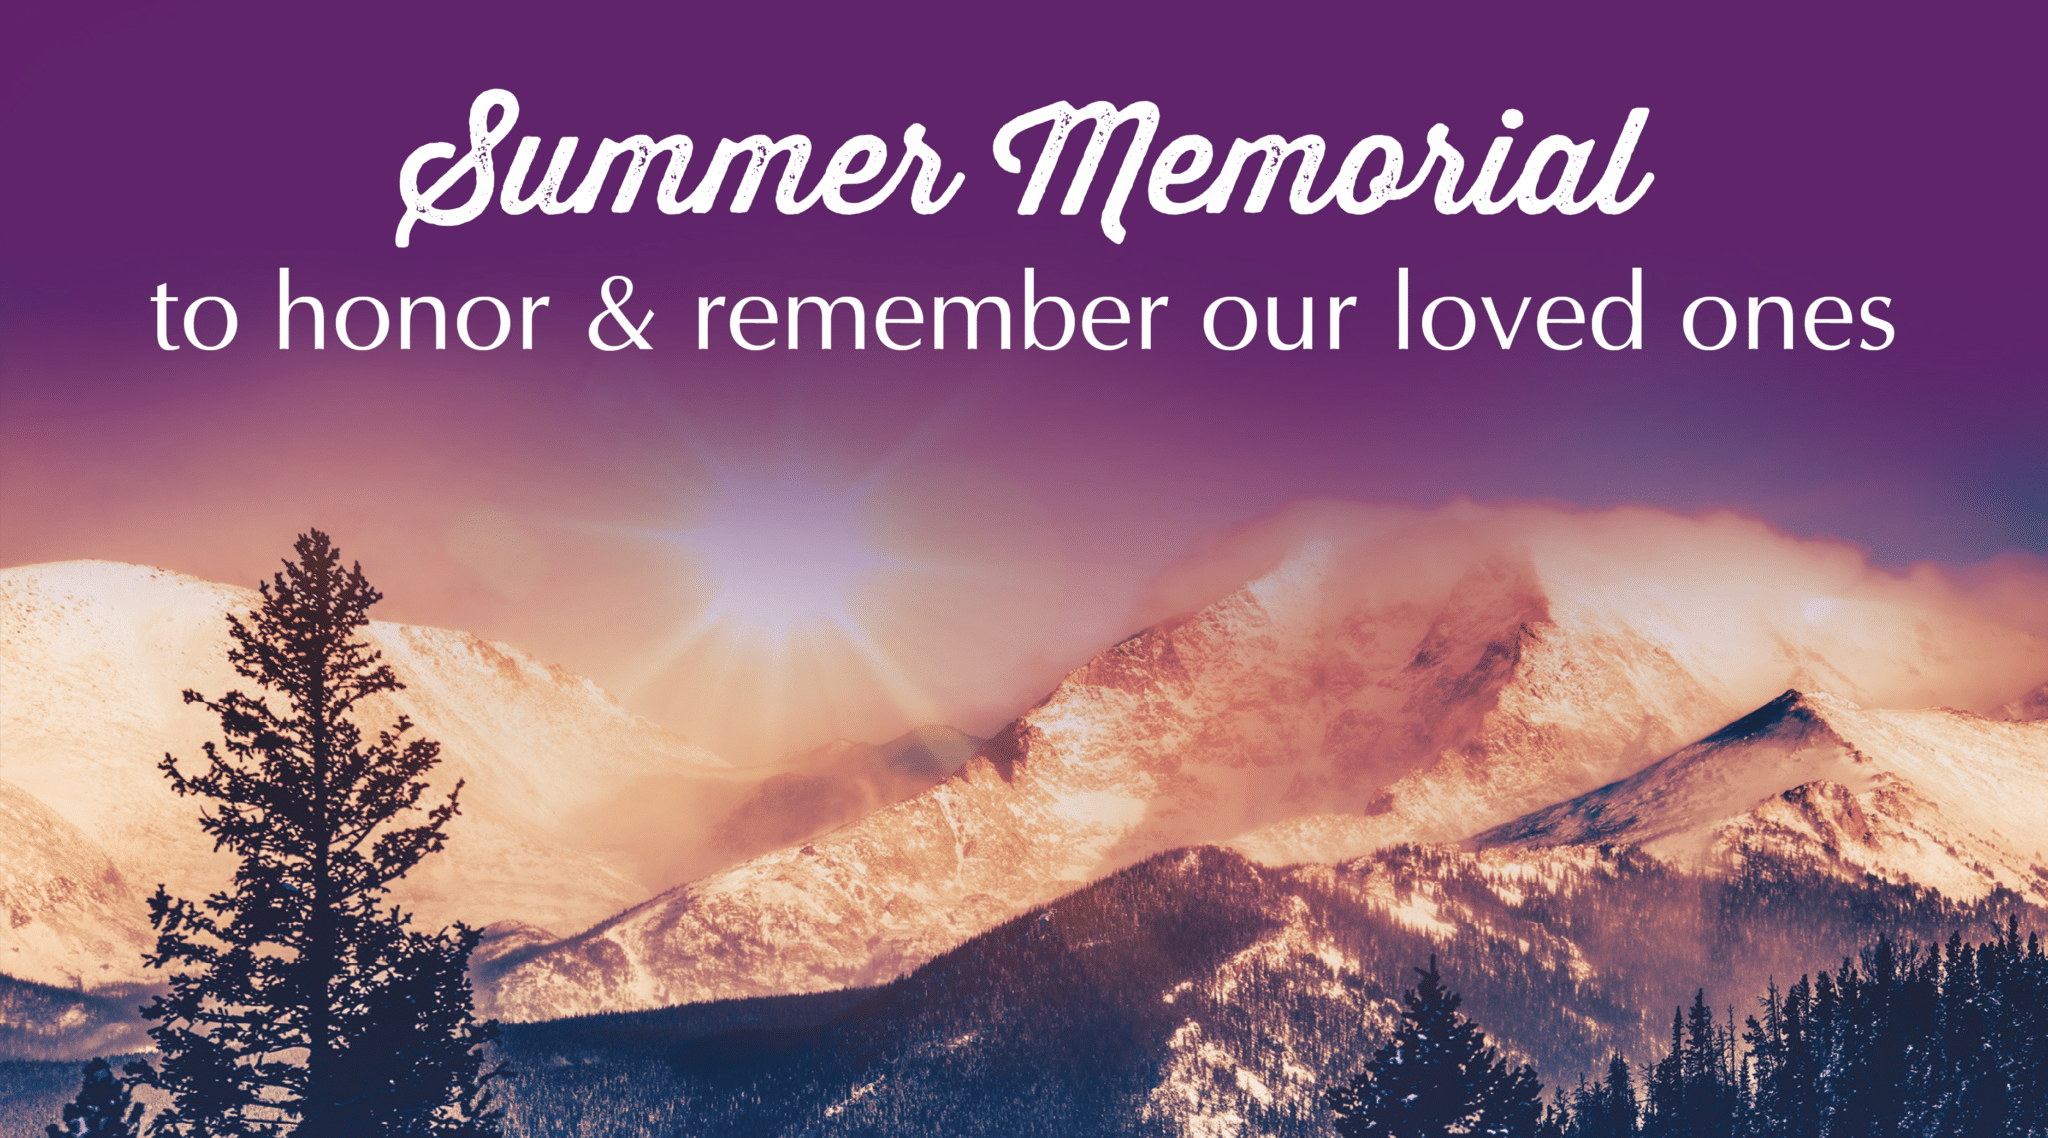 Summer Memorial to honor & remember our loved ones